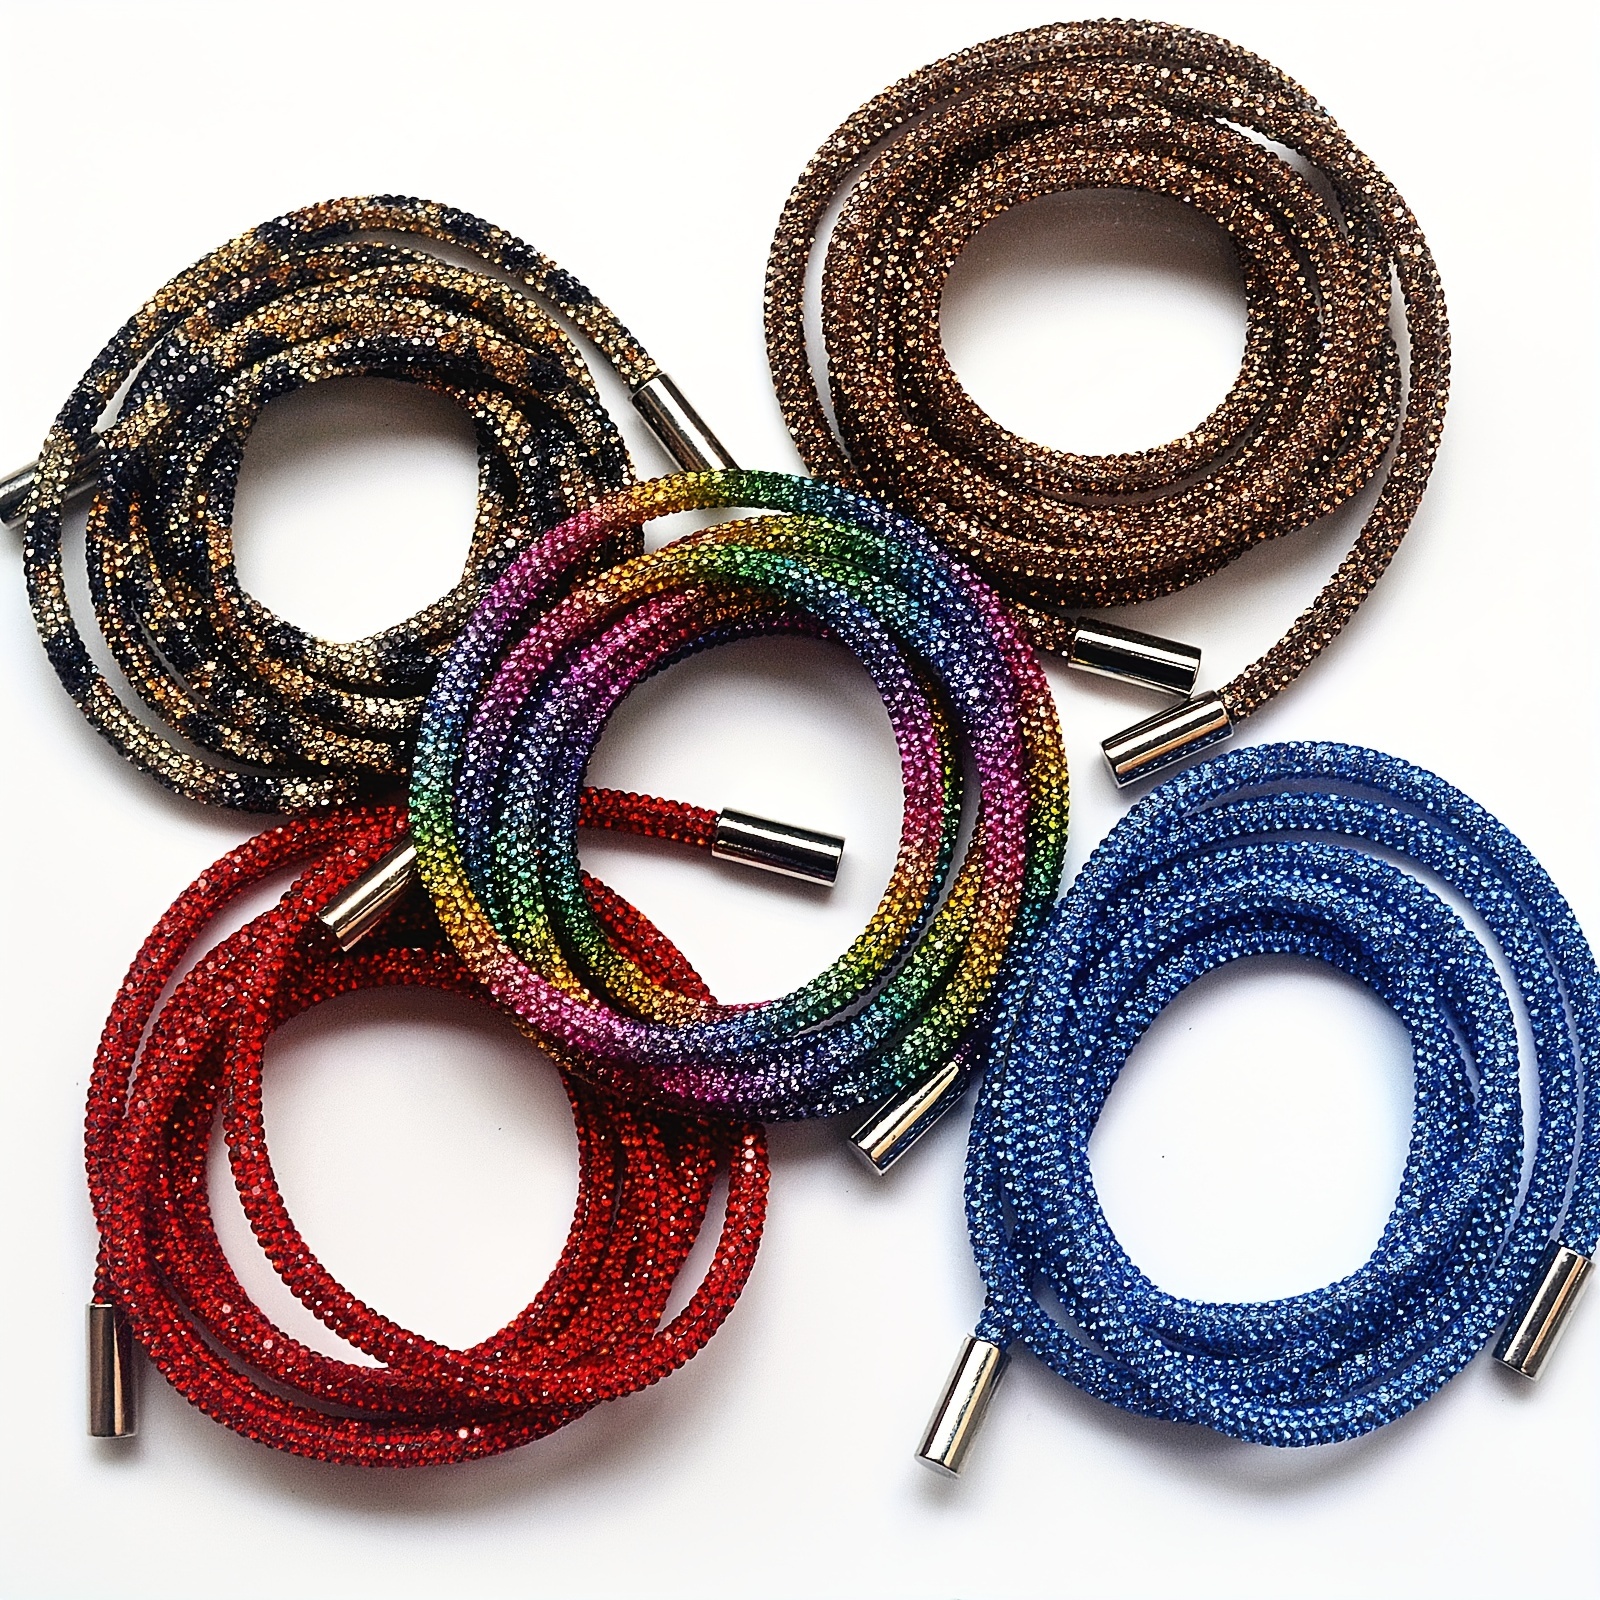 Stylish Twisted Rope Shoelaces For Fashion And Efficiency